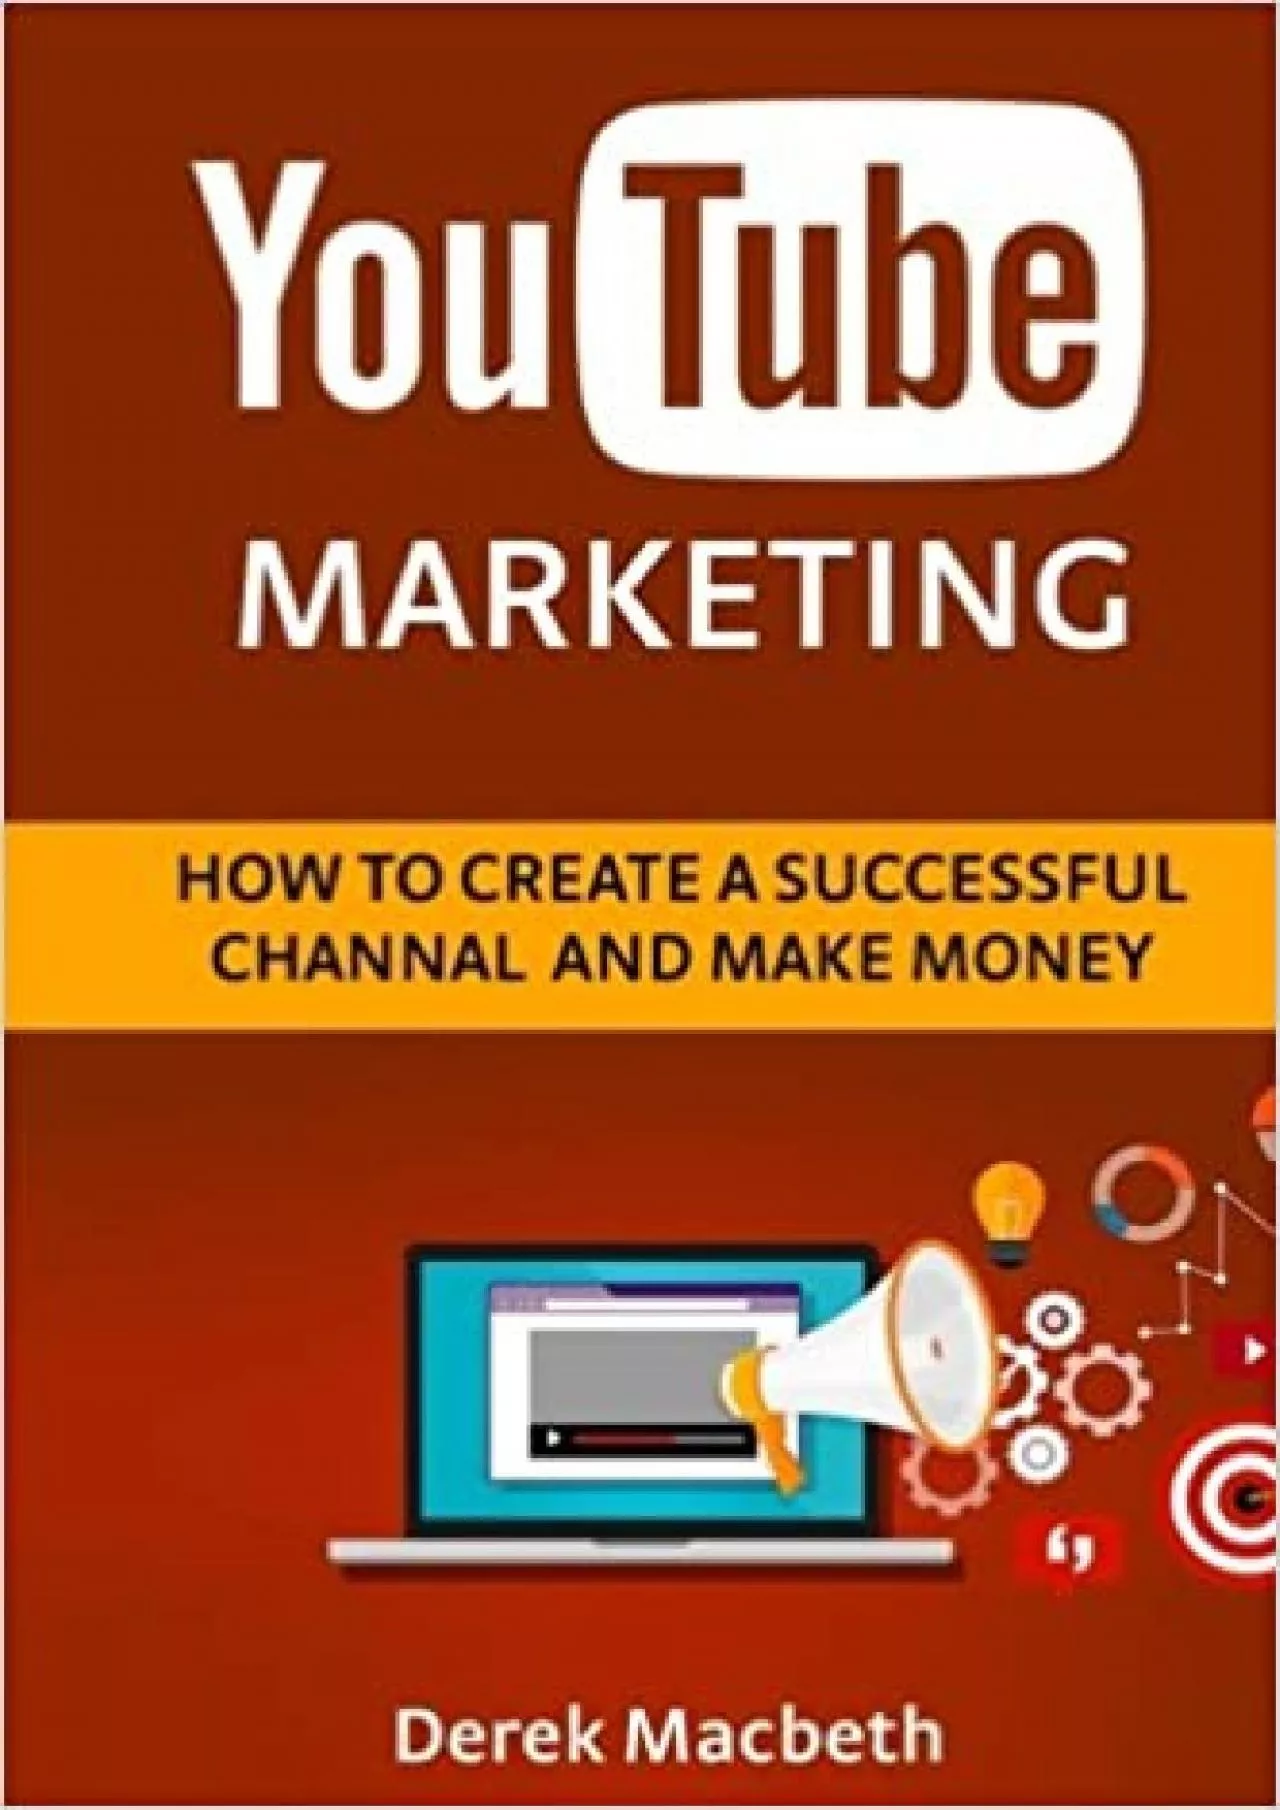 Youtube Marketing: How to Create a Successful Channel and Make Money